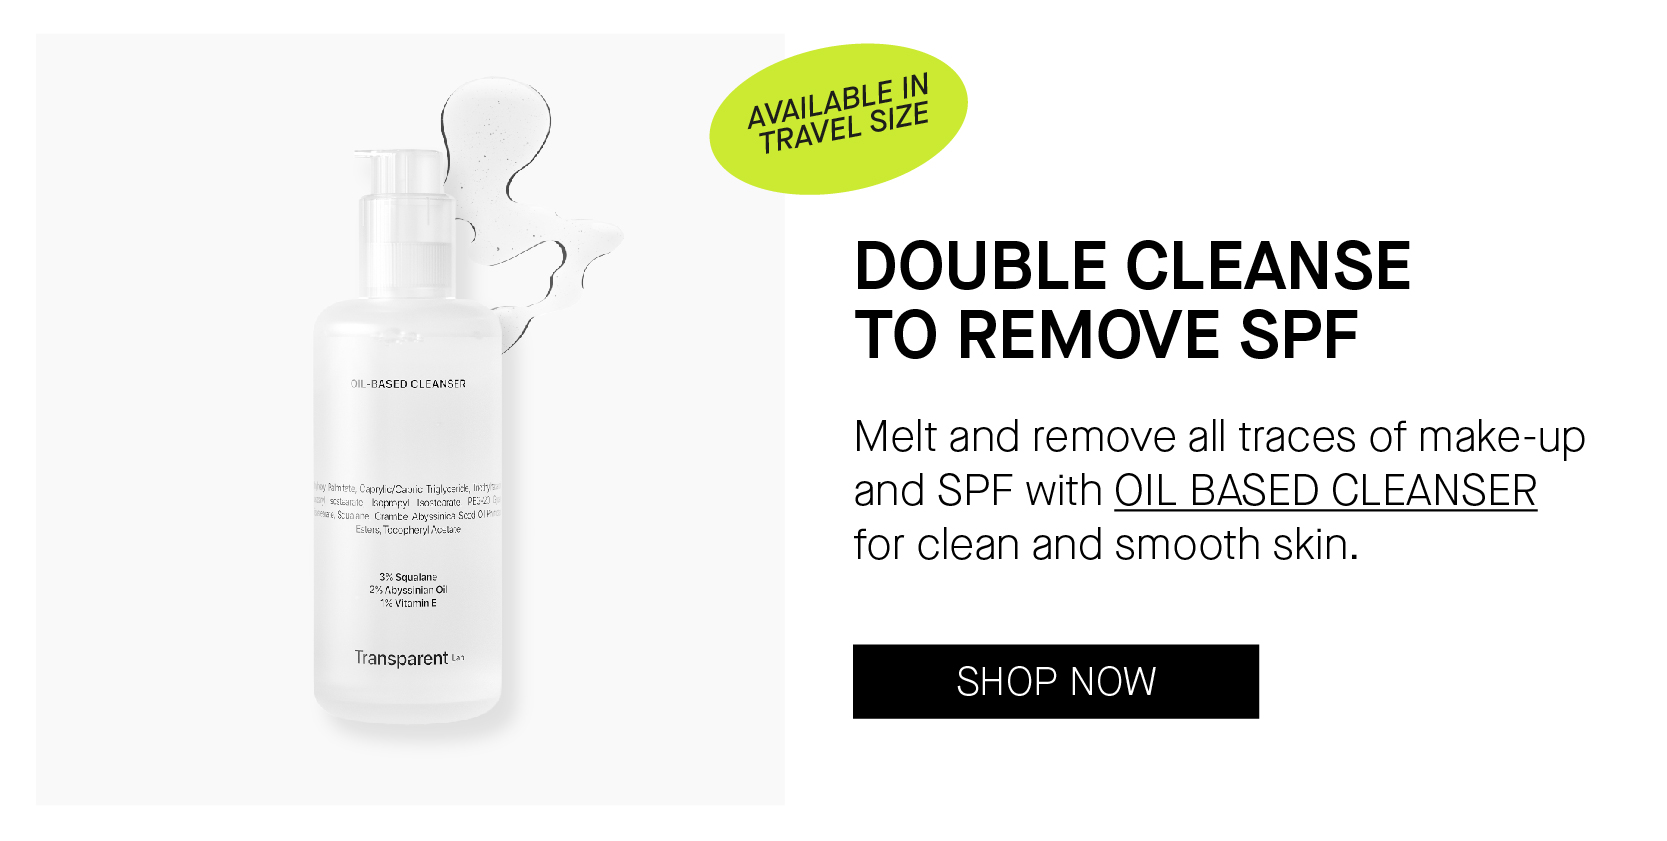 BASED CLEANSTR Transparent - DOUBLE CLEANSE TO REMOVE SPF Melt and remove all traces of make-up and SPF with OIL BASED CLEANSER for clean and smooth skin. 